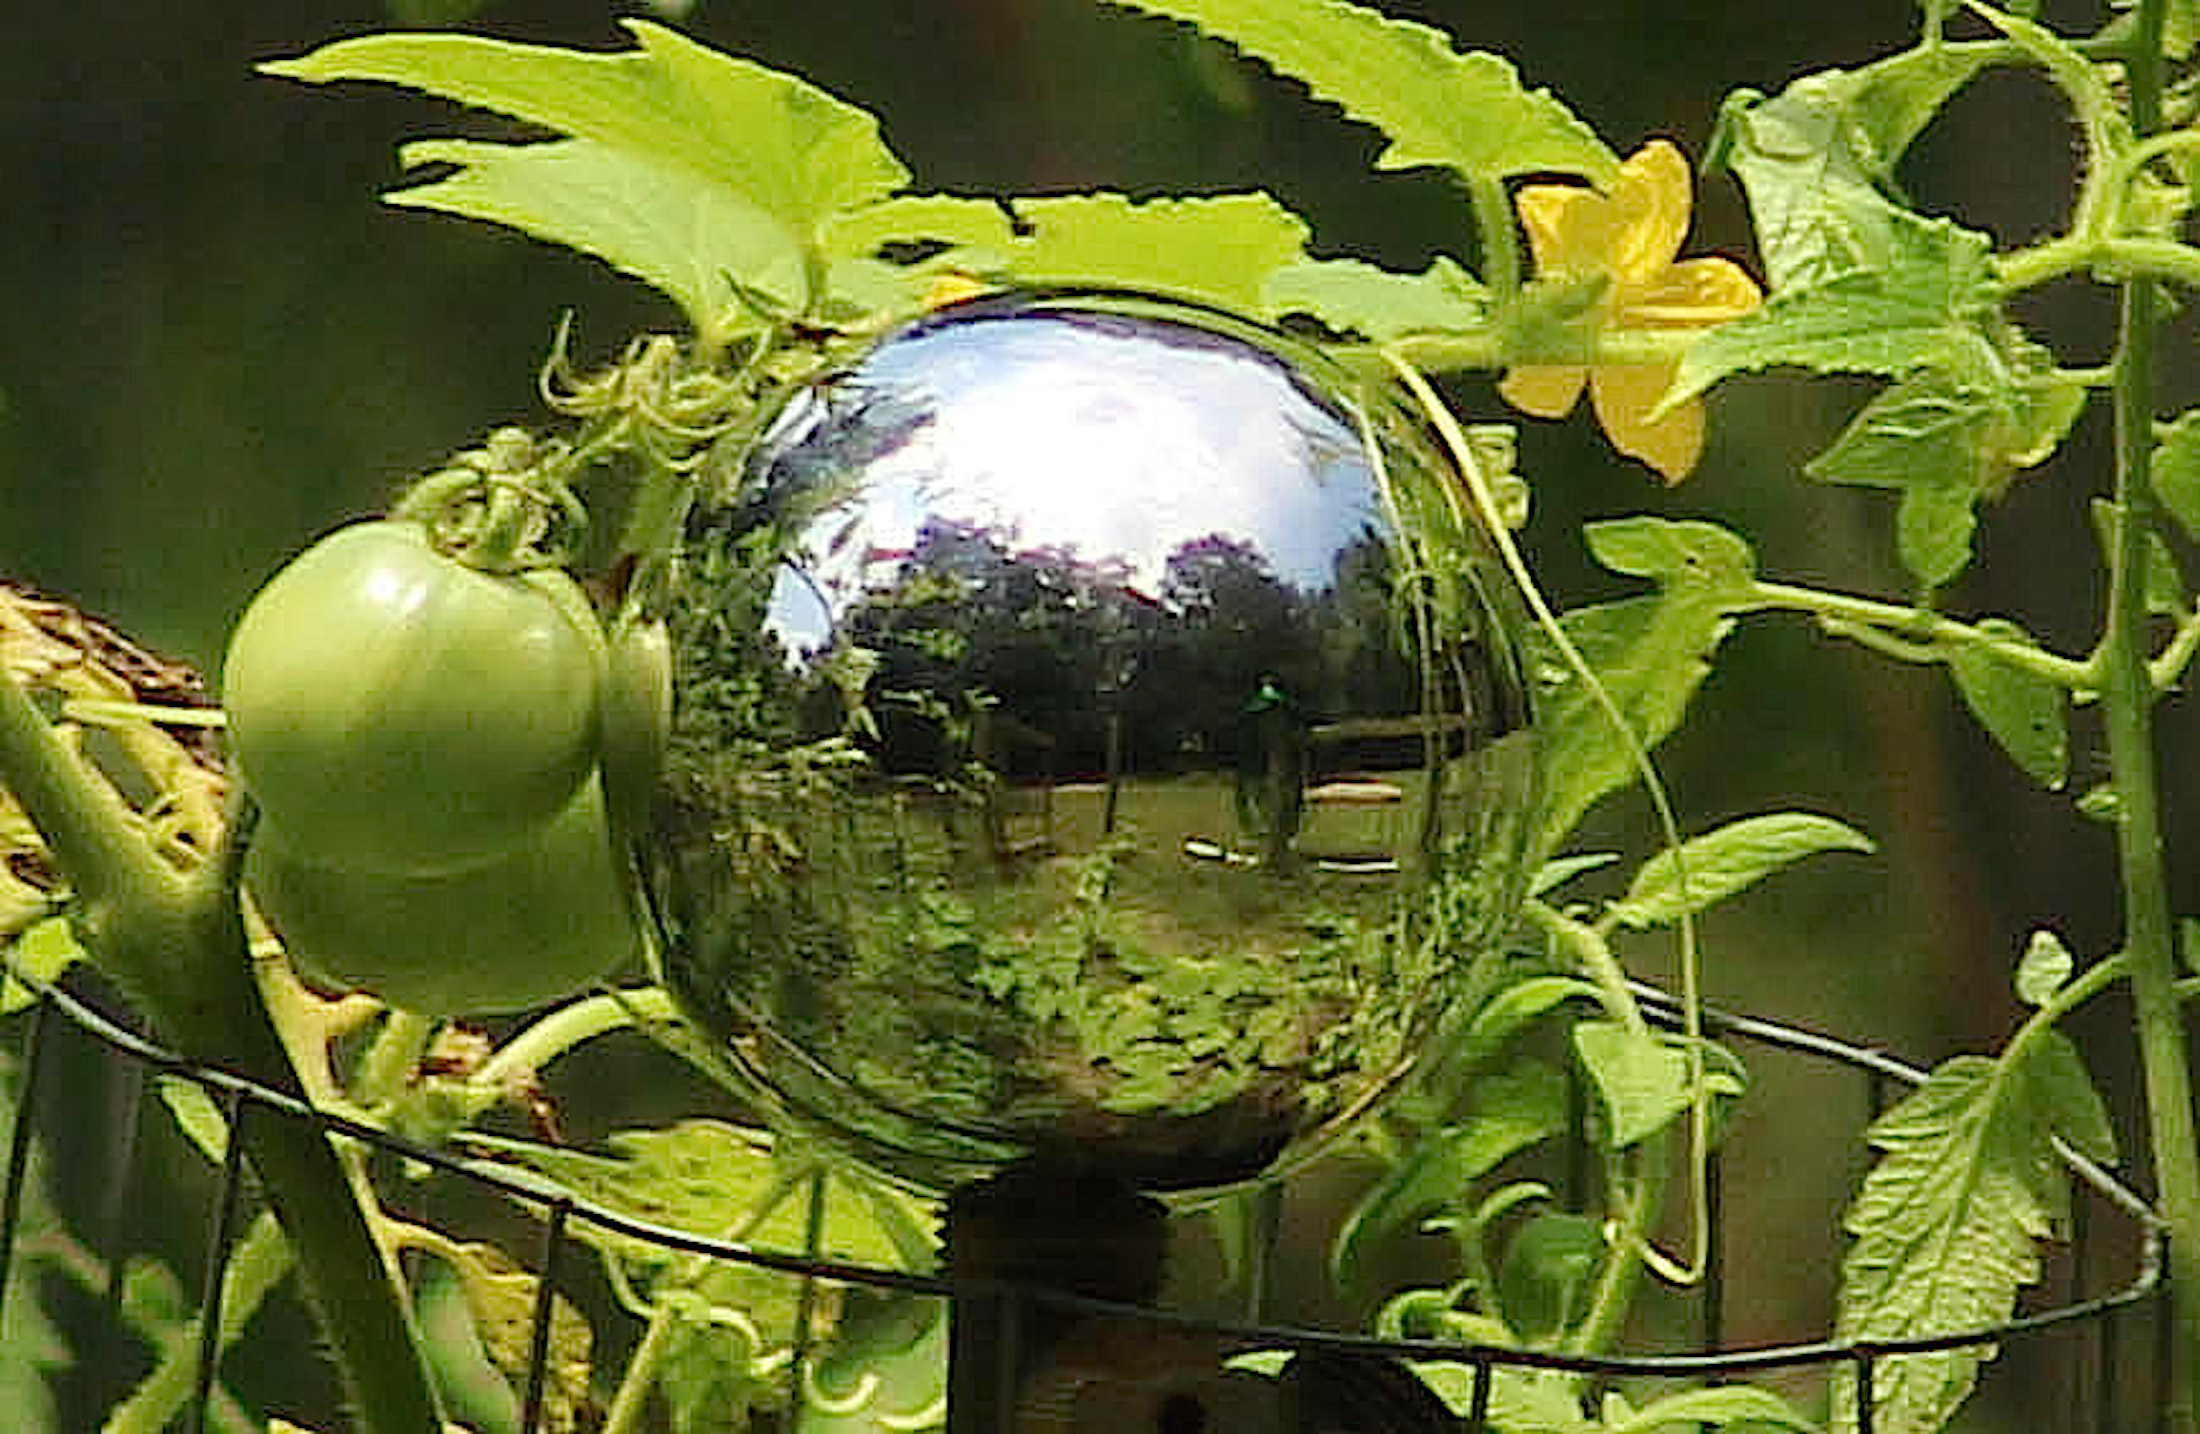 6-14inch Home Ornament Durable Stainless Steel Gazing Ball Gazing Mirror Ball,Gazing Globe Mirror Ball for Garden